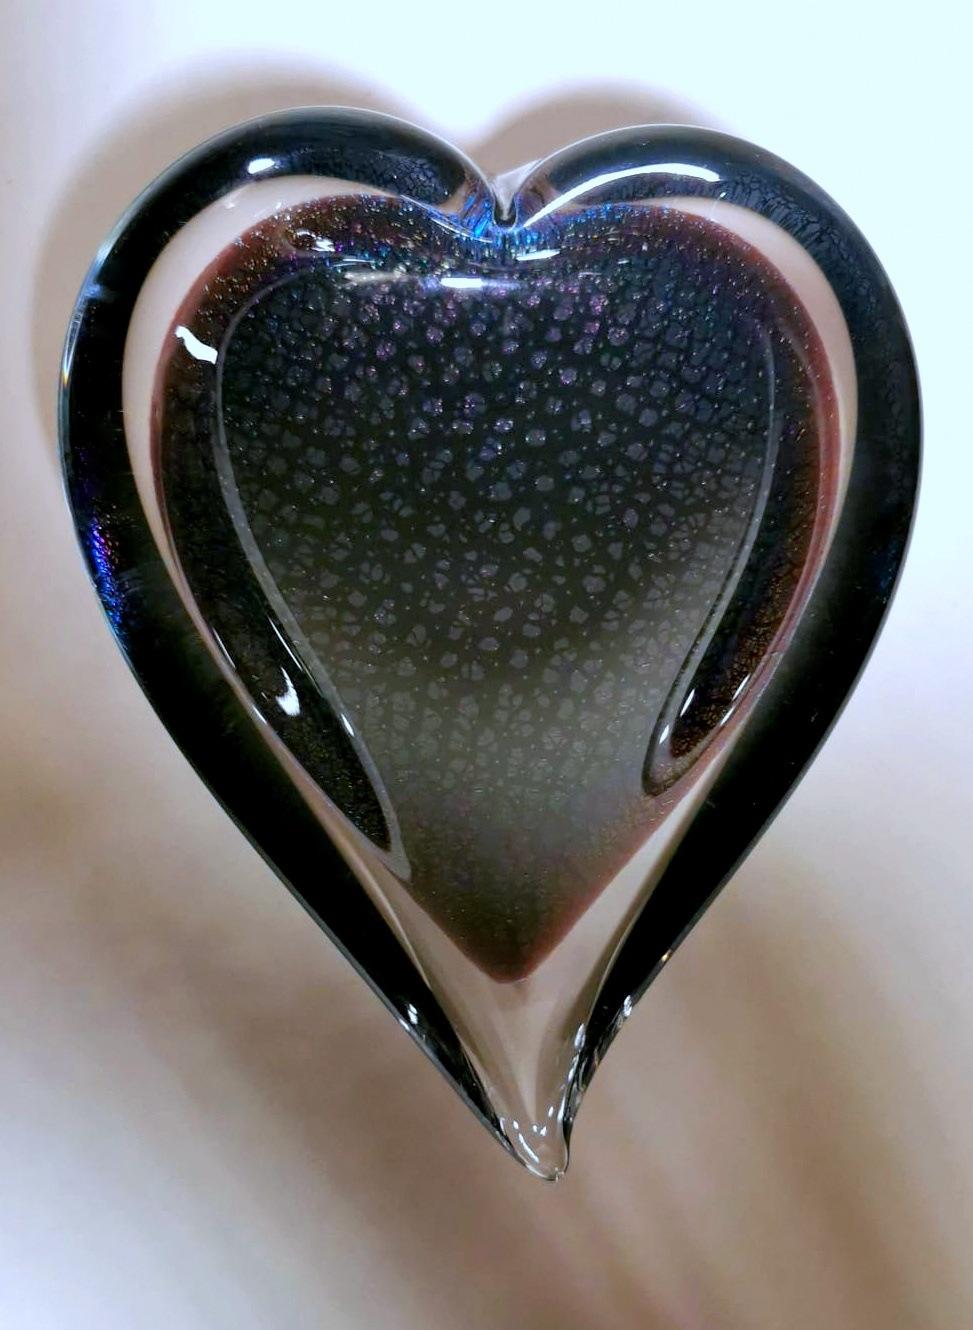 We kindly suggest that you read the entire description, as with it we try to give you detailed technical and historical information to guarantee the authenticity of our objects.
Peculiar and refined heart-shaped blown glass ashtray; the signature